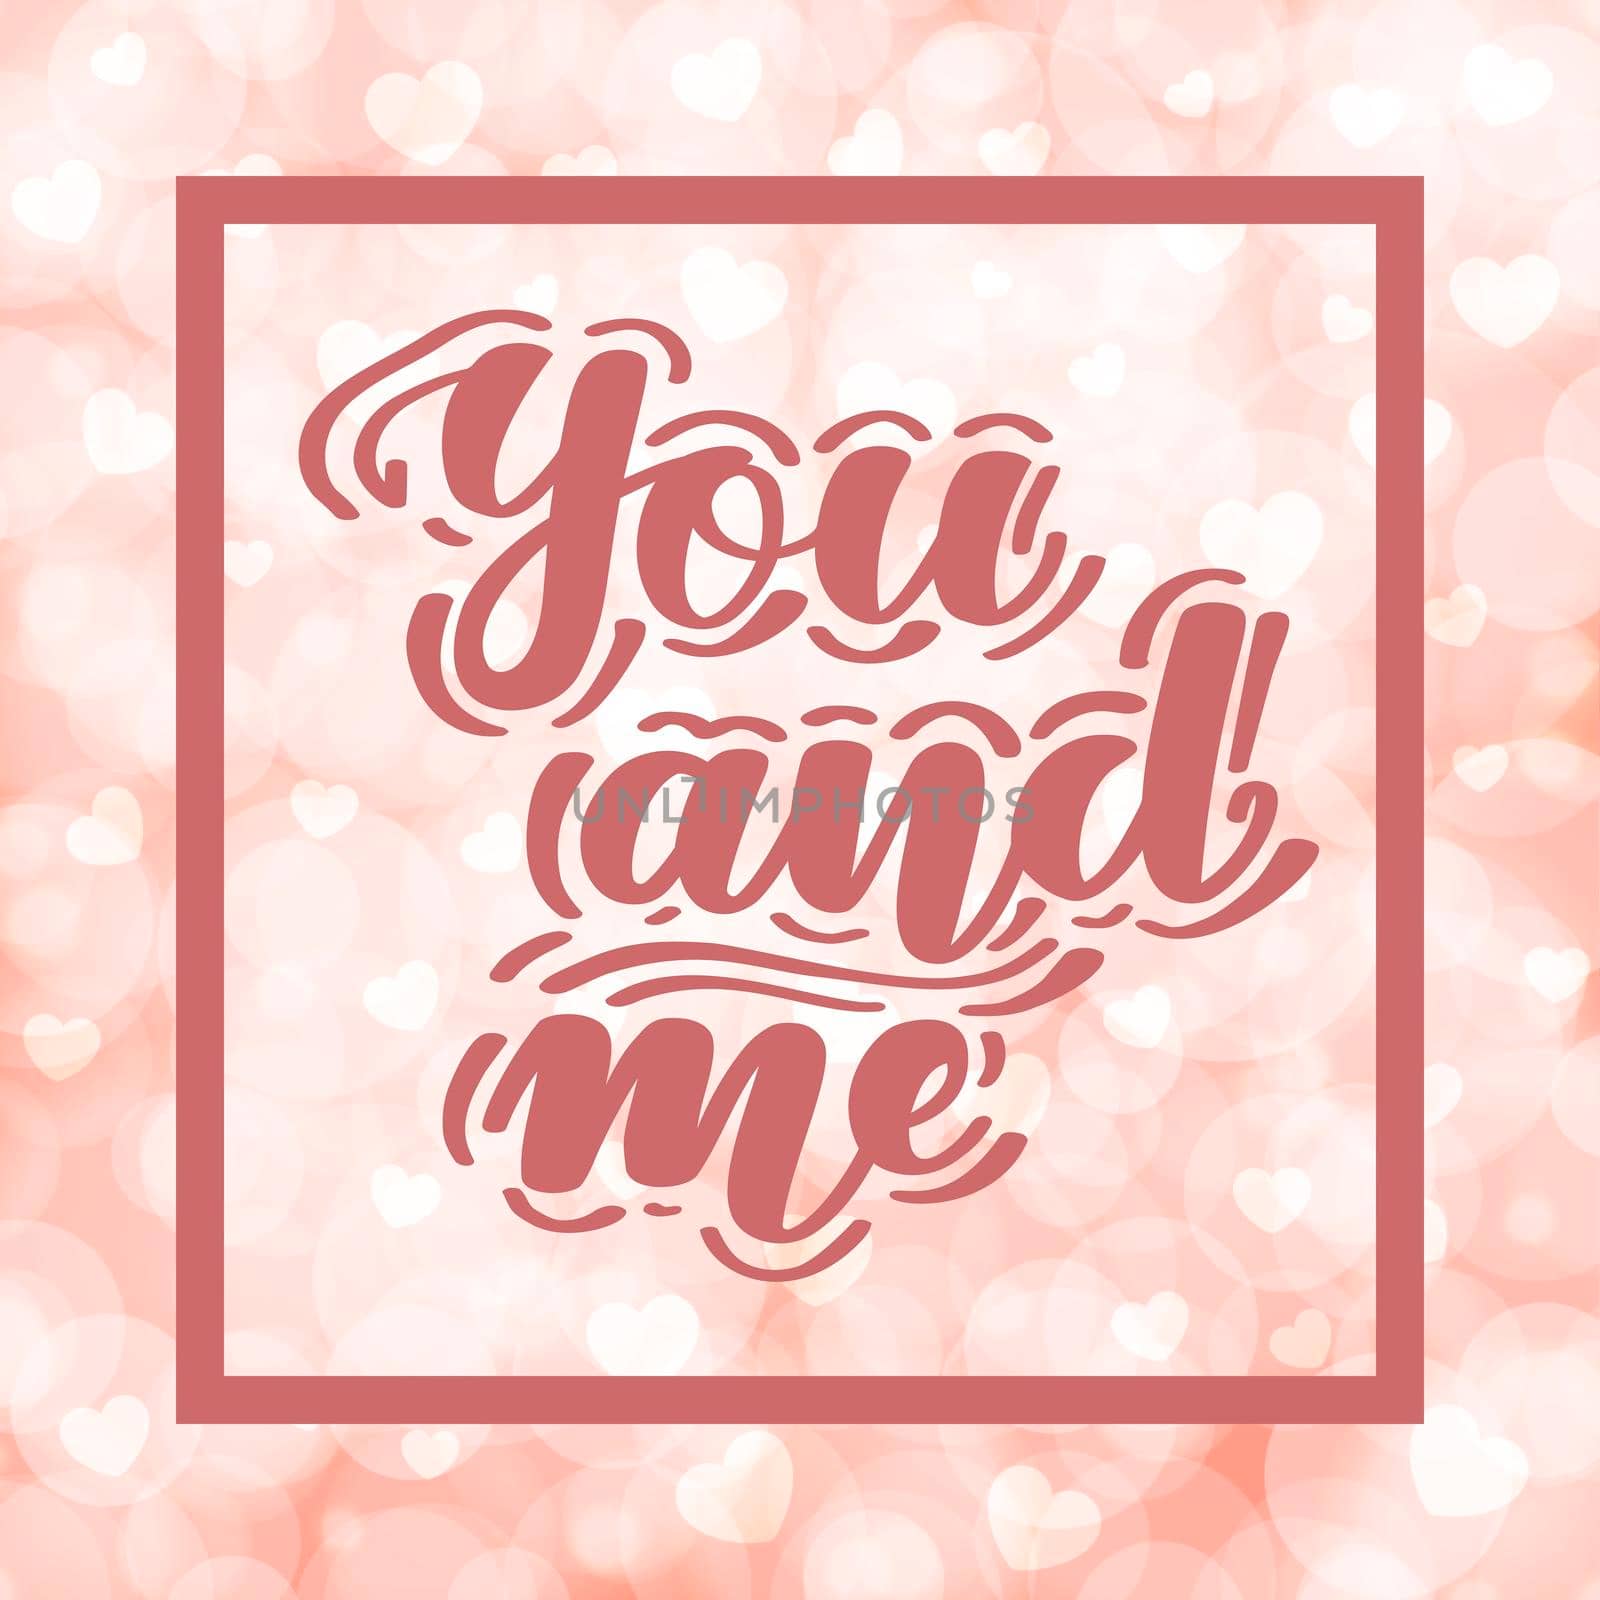 You and me. Romantic handwritten lettering on blurred bokeh background with hearts. illustration for posters, cards and much more.